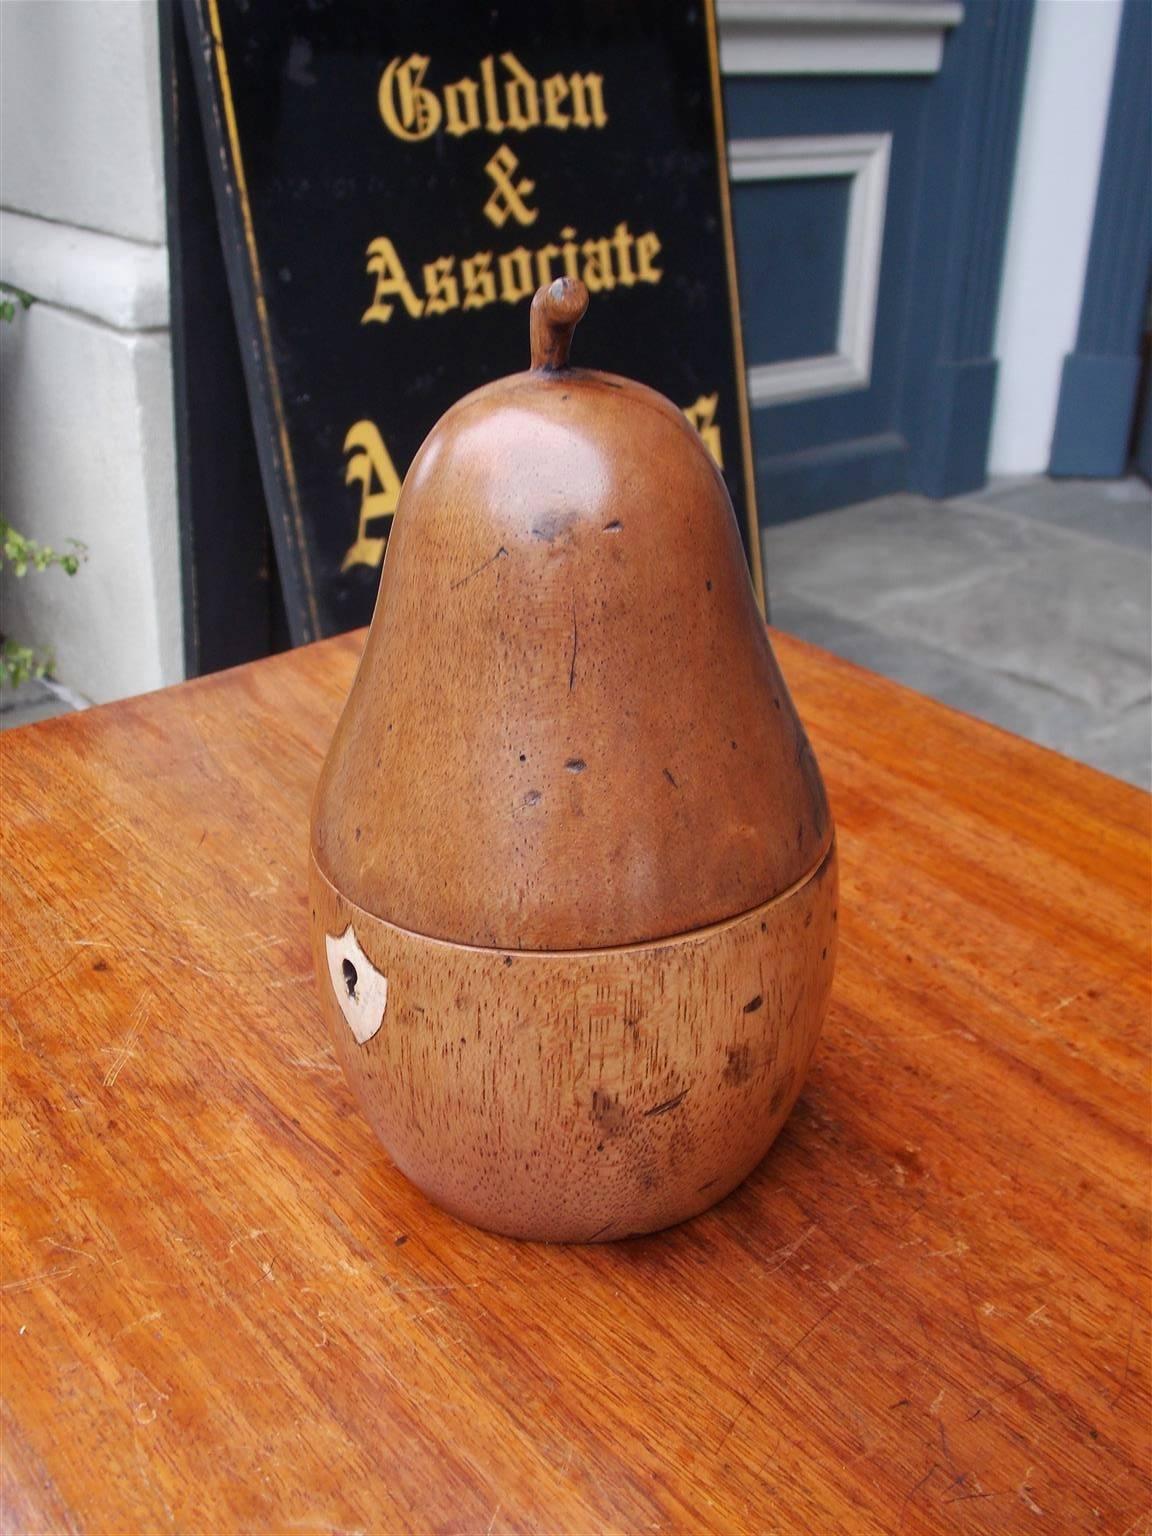 Victorian English Cherry Pear Shaped Hinged Tea Caddy with Lined Foil Interior. 20th Cent.